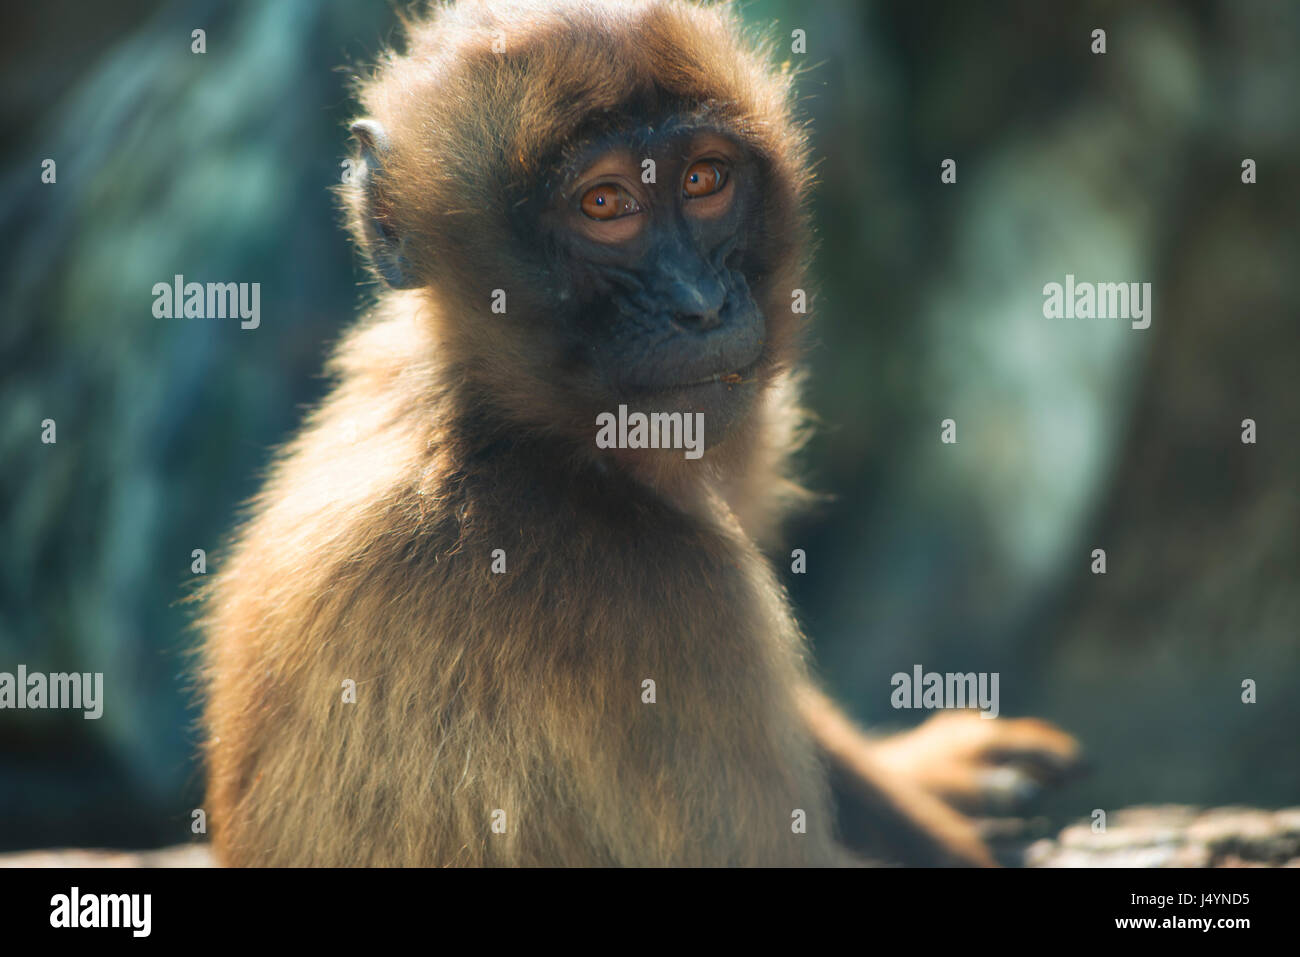 A sitting Gelada (Theropithecus gelada), which was very interested on my actions at the other side of the glass, is looking directly into the camera.|Gelada (Theropithecus gelada) Stock Photo